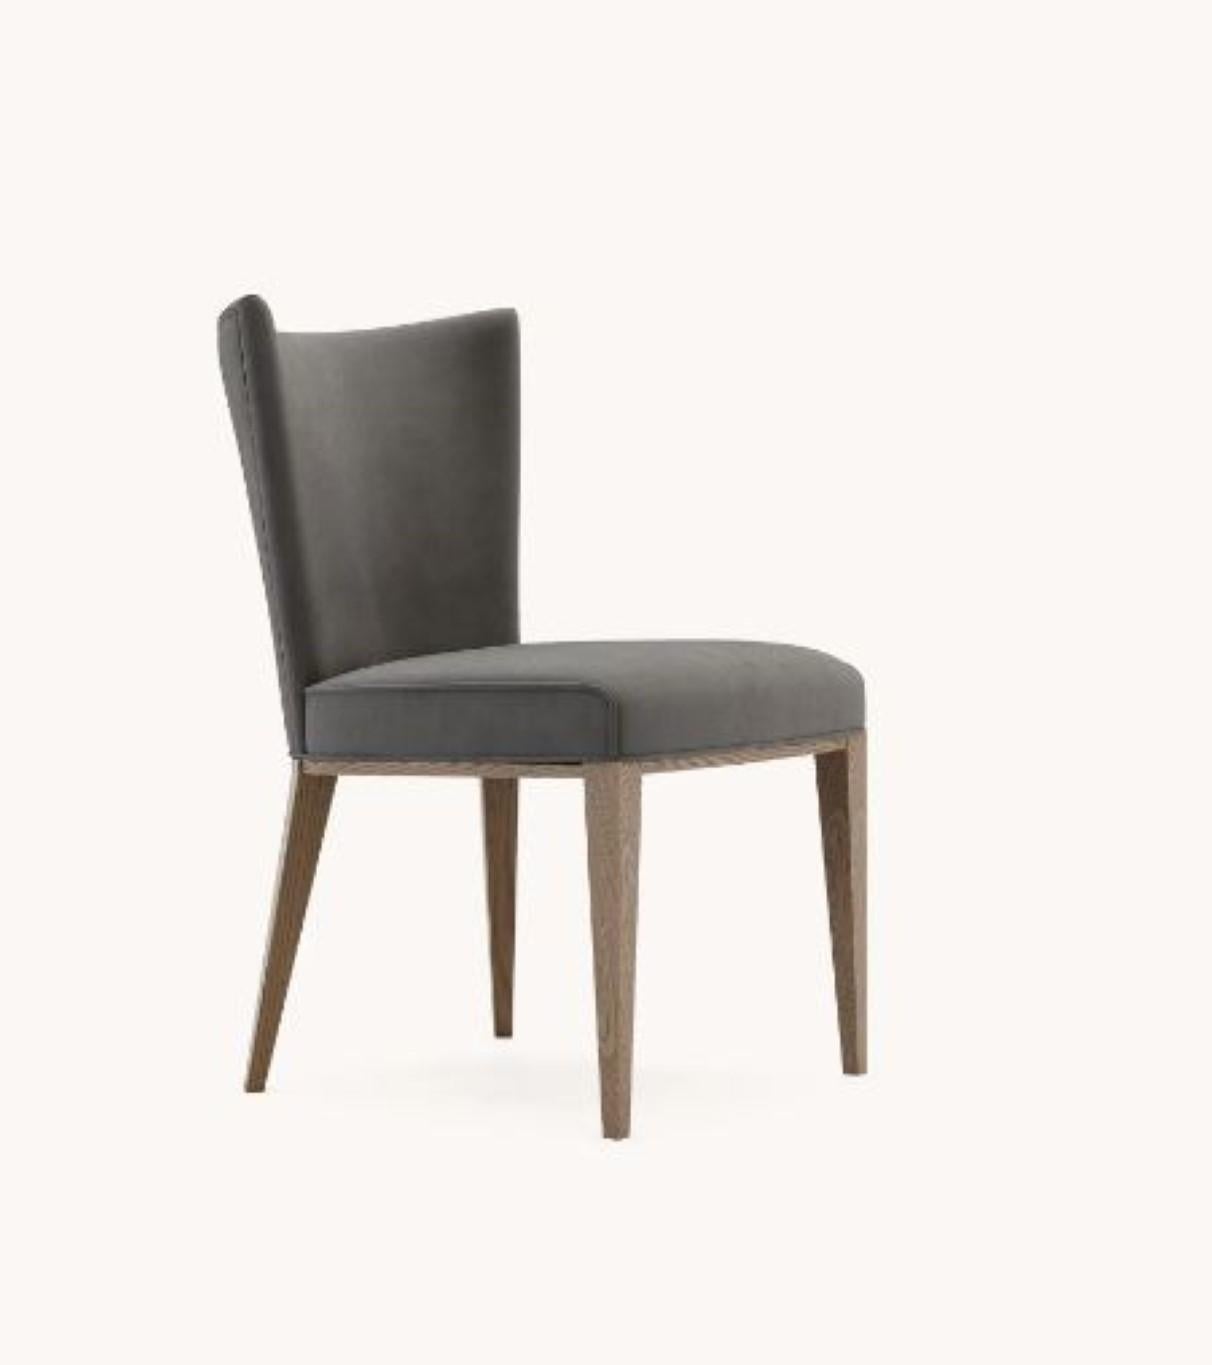 Vianna chair by Domkapa
Materials: Walnut Stained Ash, Velvet.
Dimensions: W 53 x D 65 x H 85 cm. 
Also available in different materials. Please contact us.

The epitome of comfort, the best description of Vianna chair. Supported by four wooden